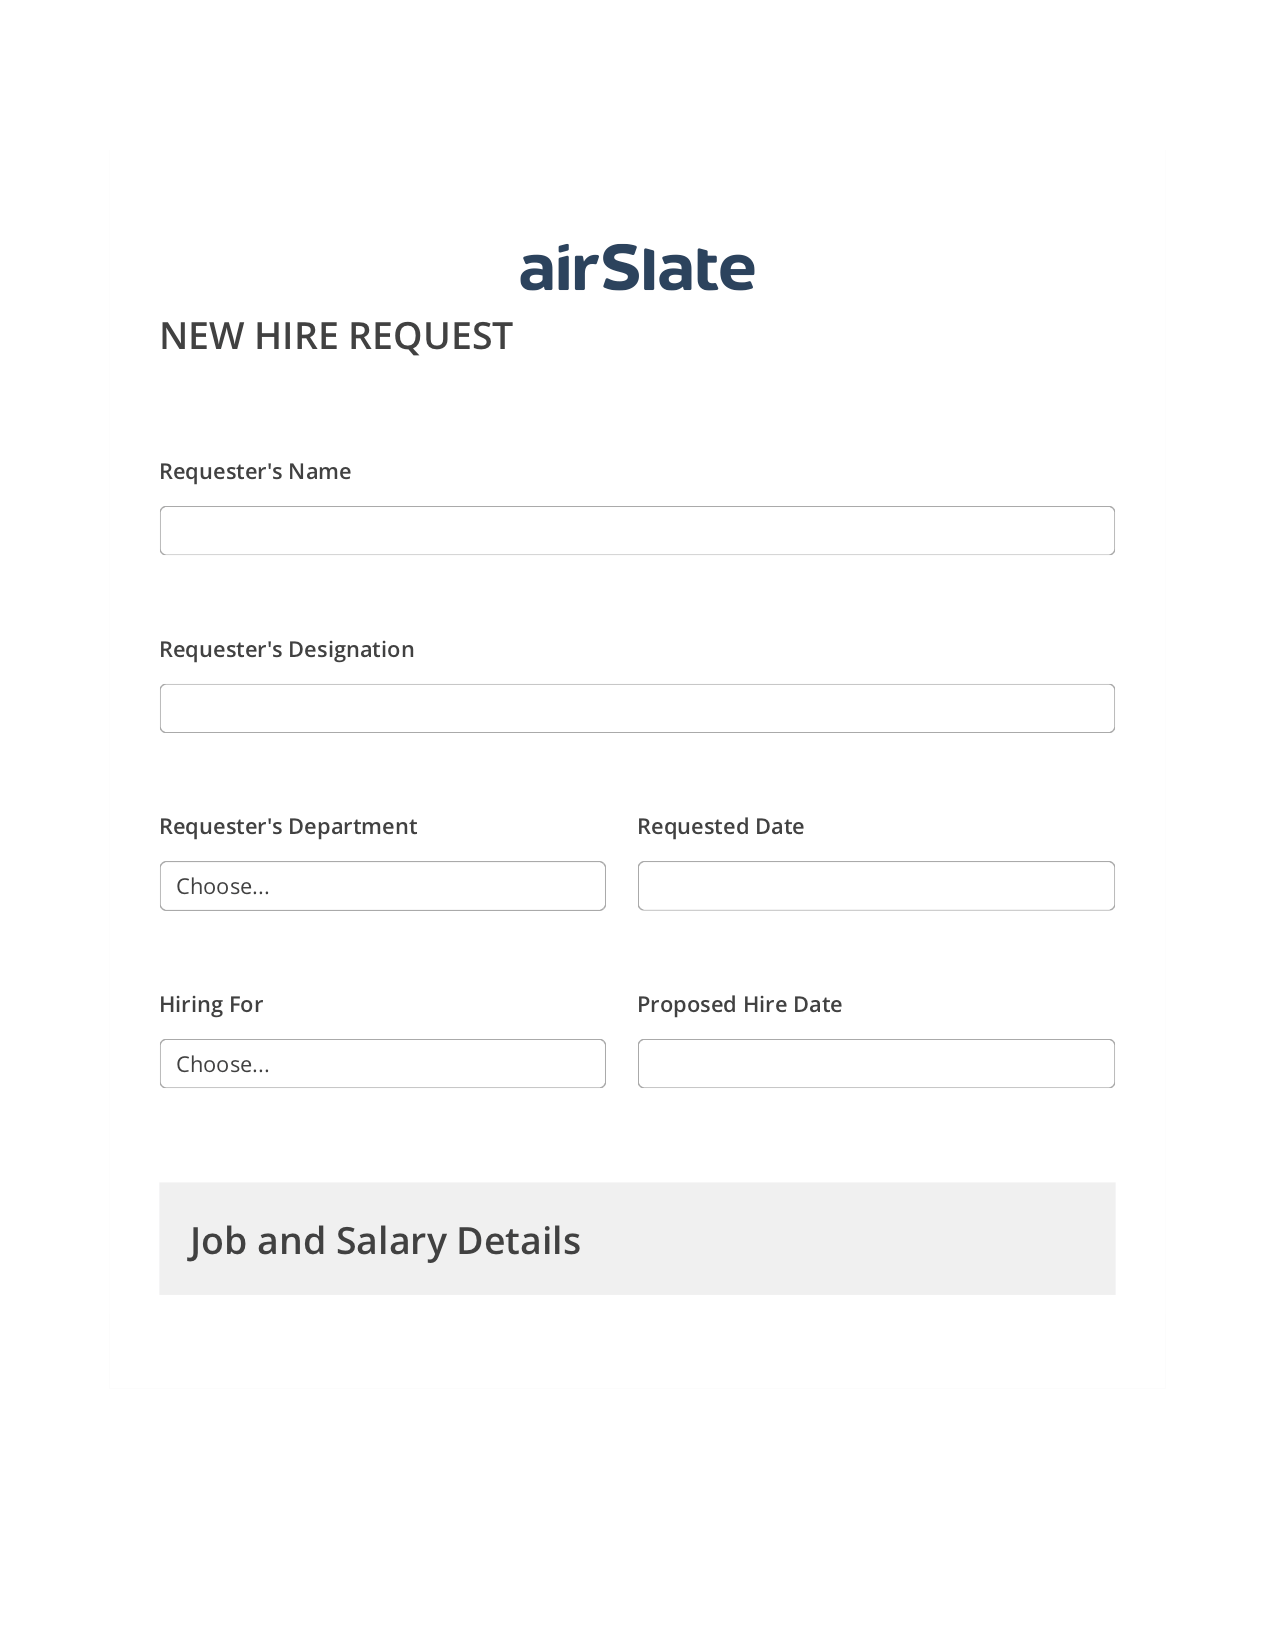 Hiring Request Workflow Pre-fill from another Slate Bot, Revoke Access Bot, Export to MySQL Bot